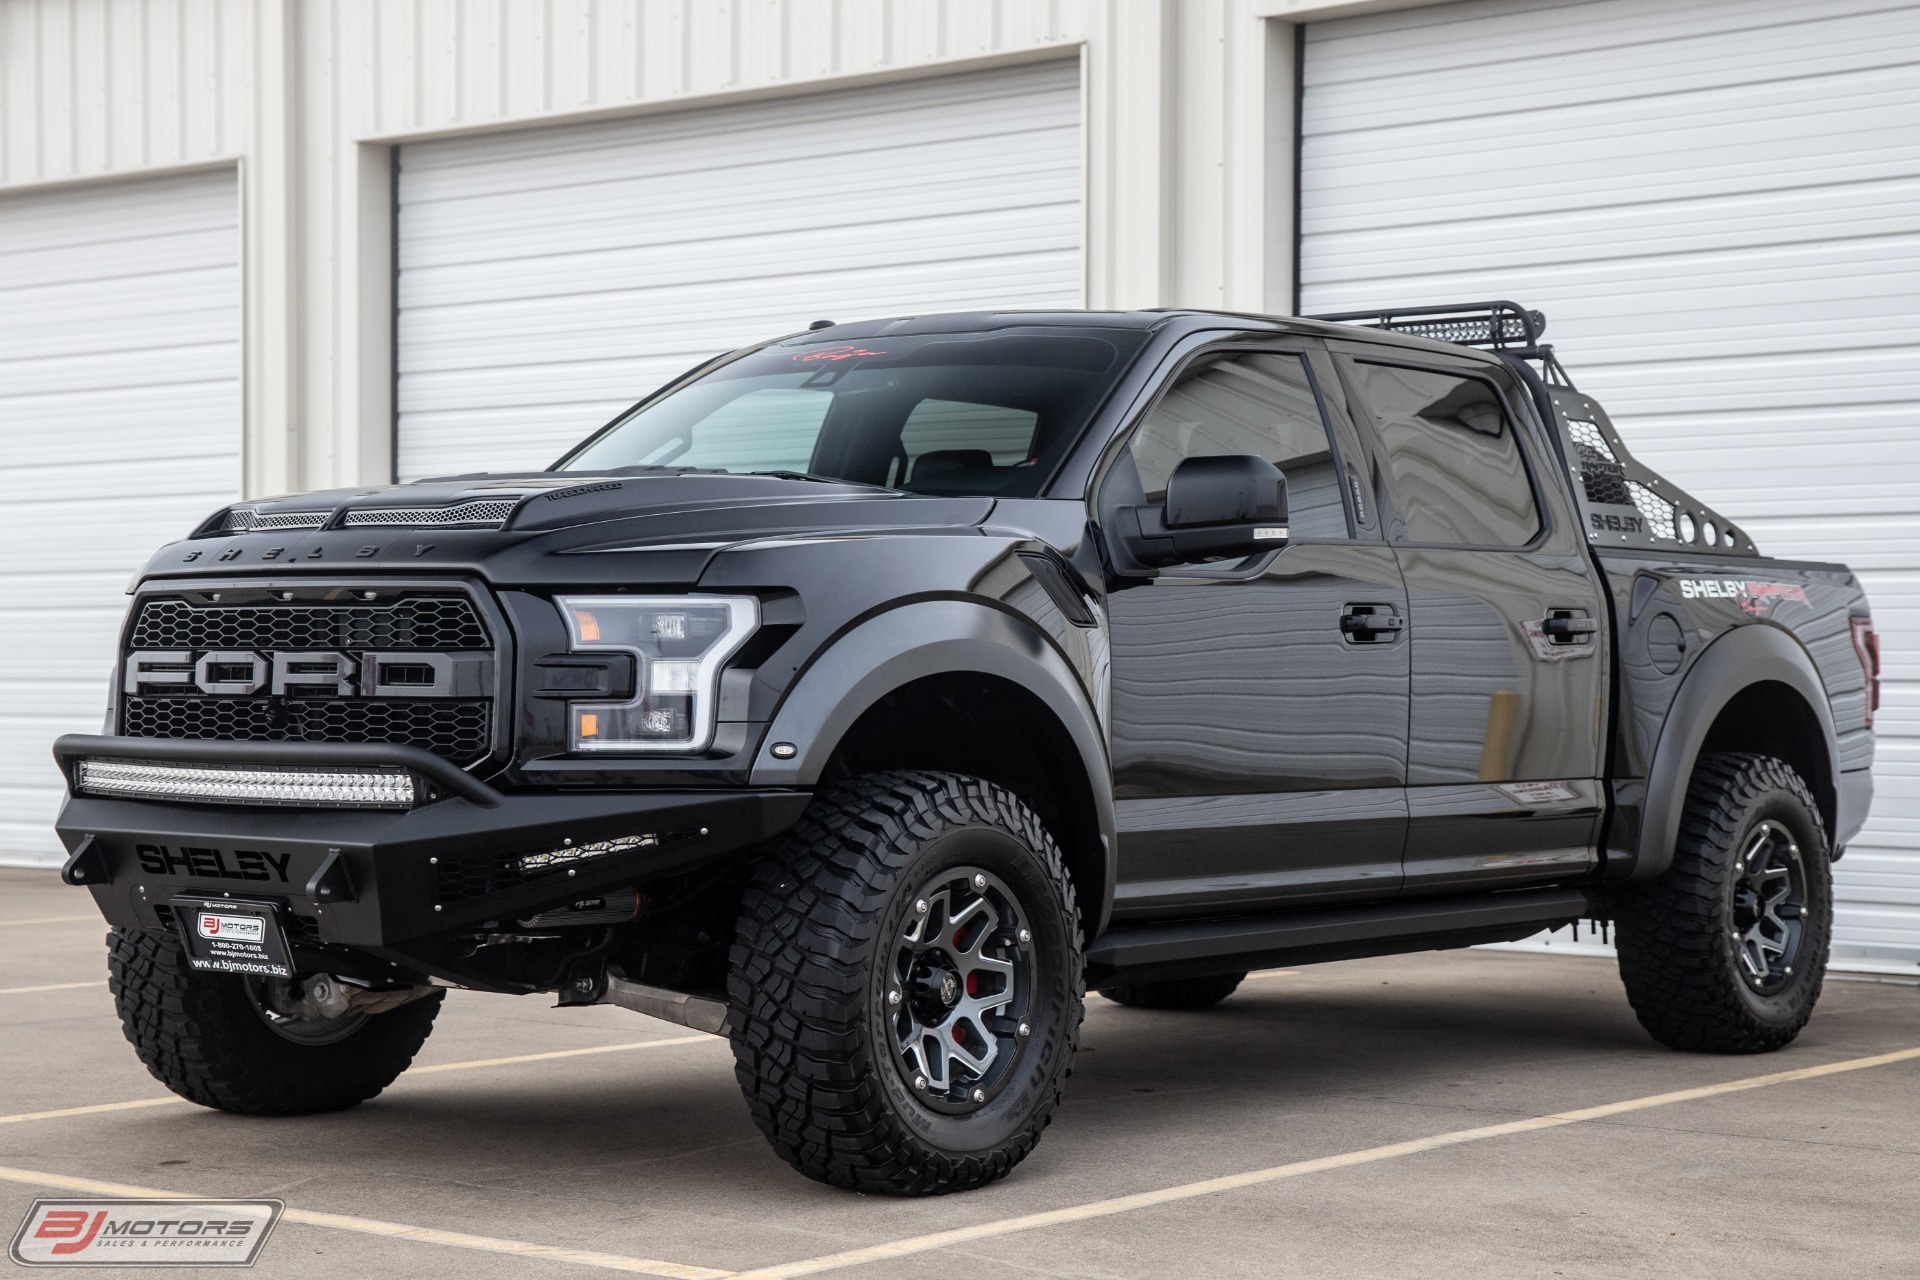 Used 2018 Ford F-150 Shelby Baja Raptor For Sale (Special Pricing) | BJ ...